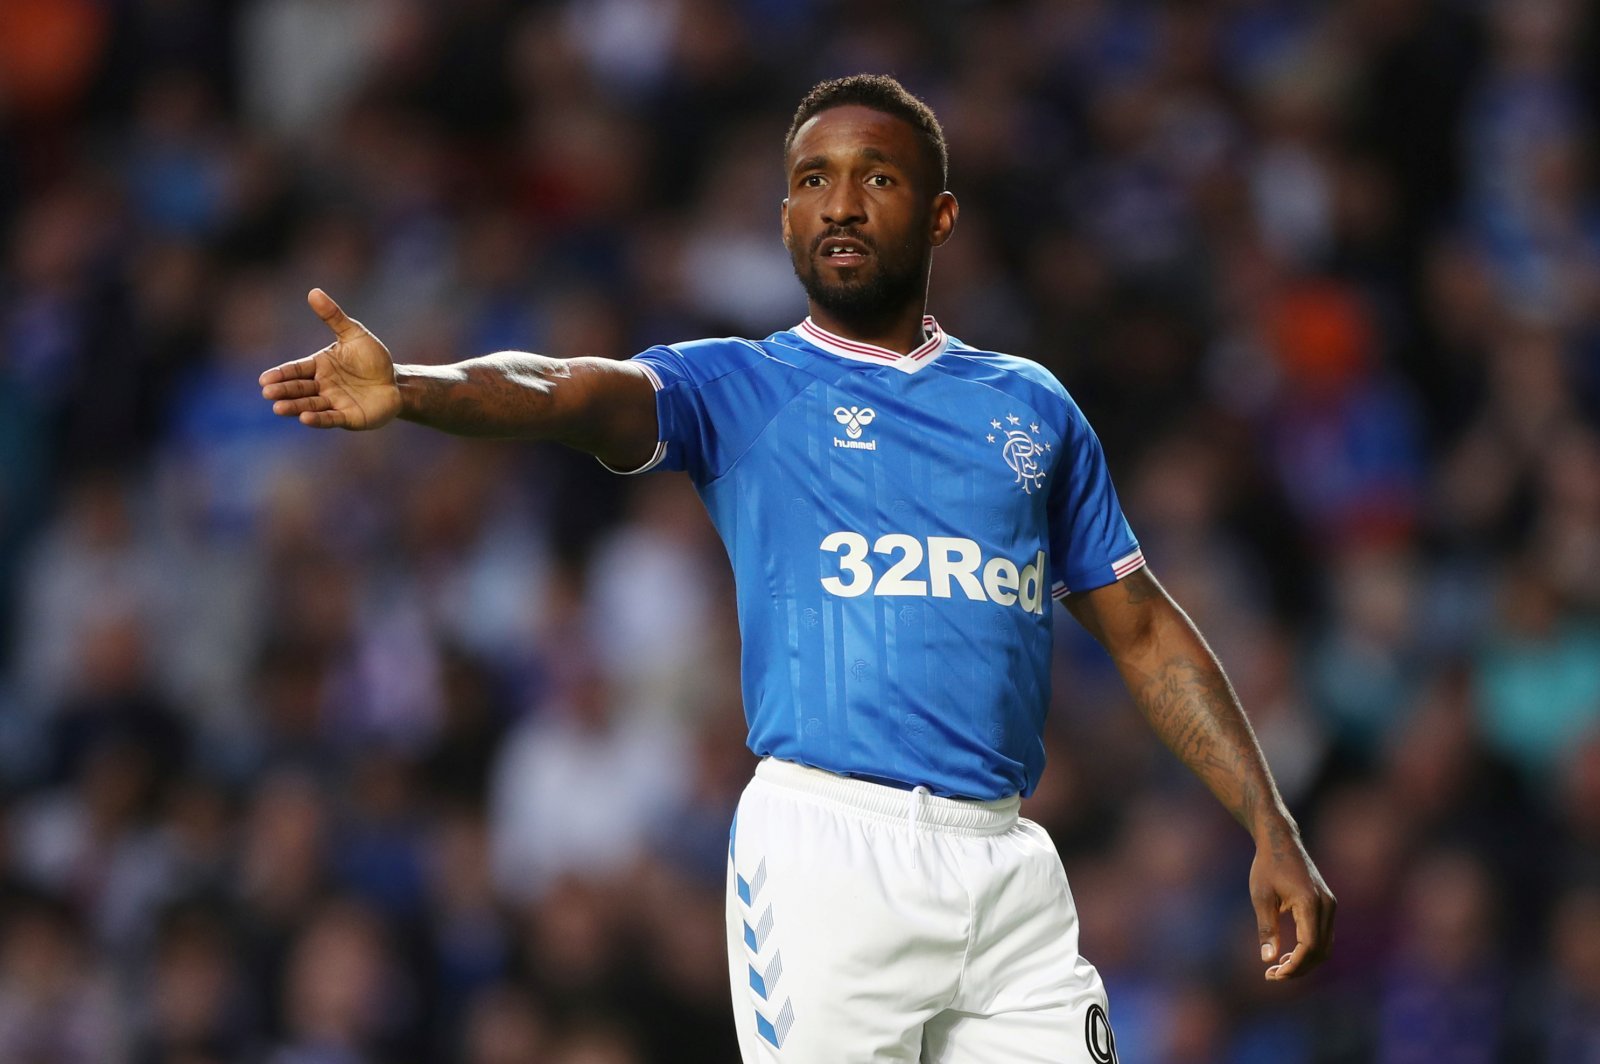 Roberts reveals Defoe is delighted to stay at Rangers - Exclusive